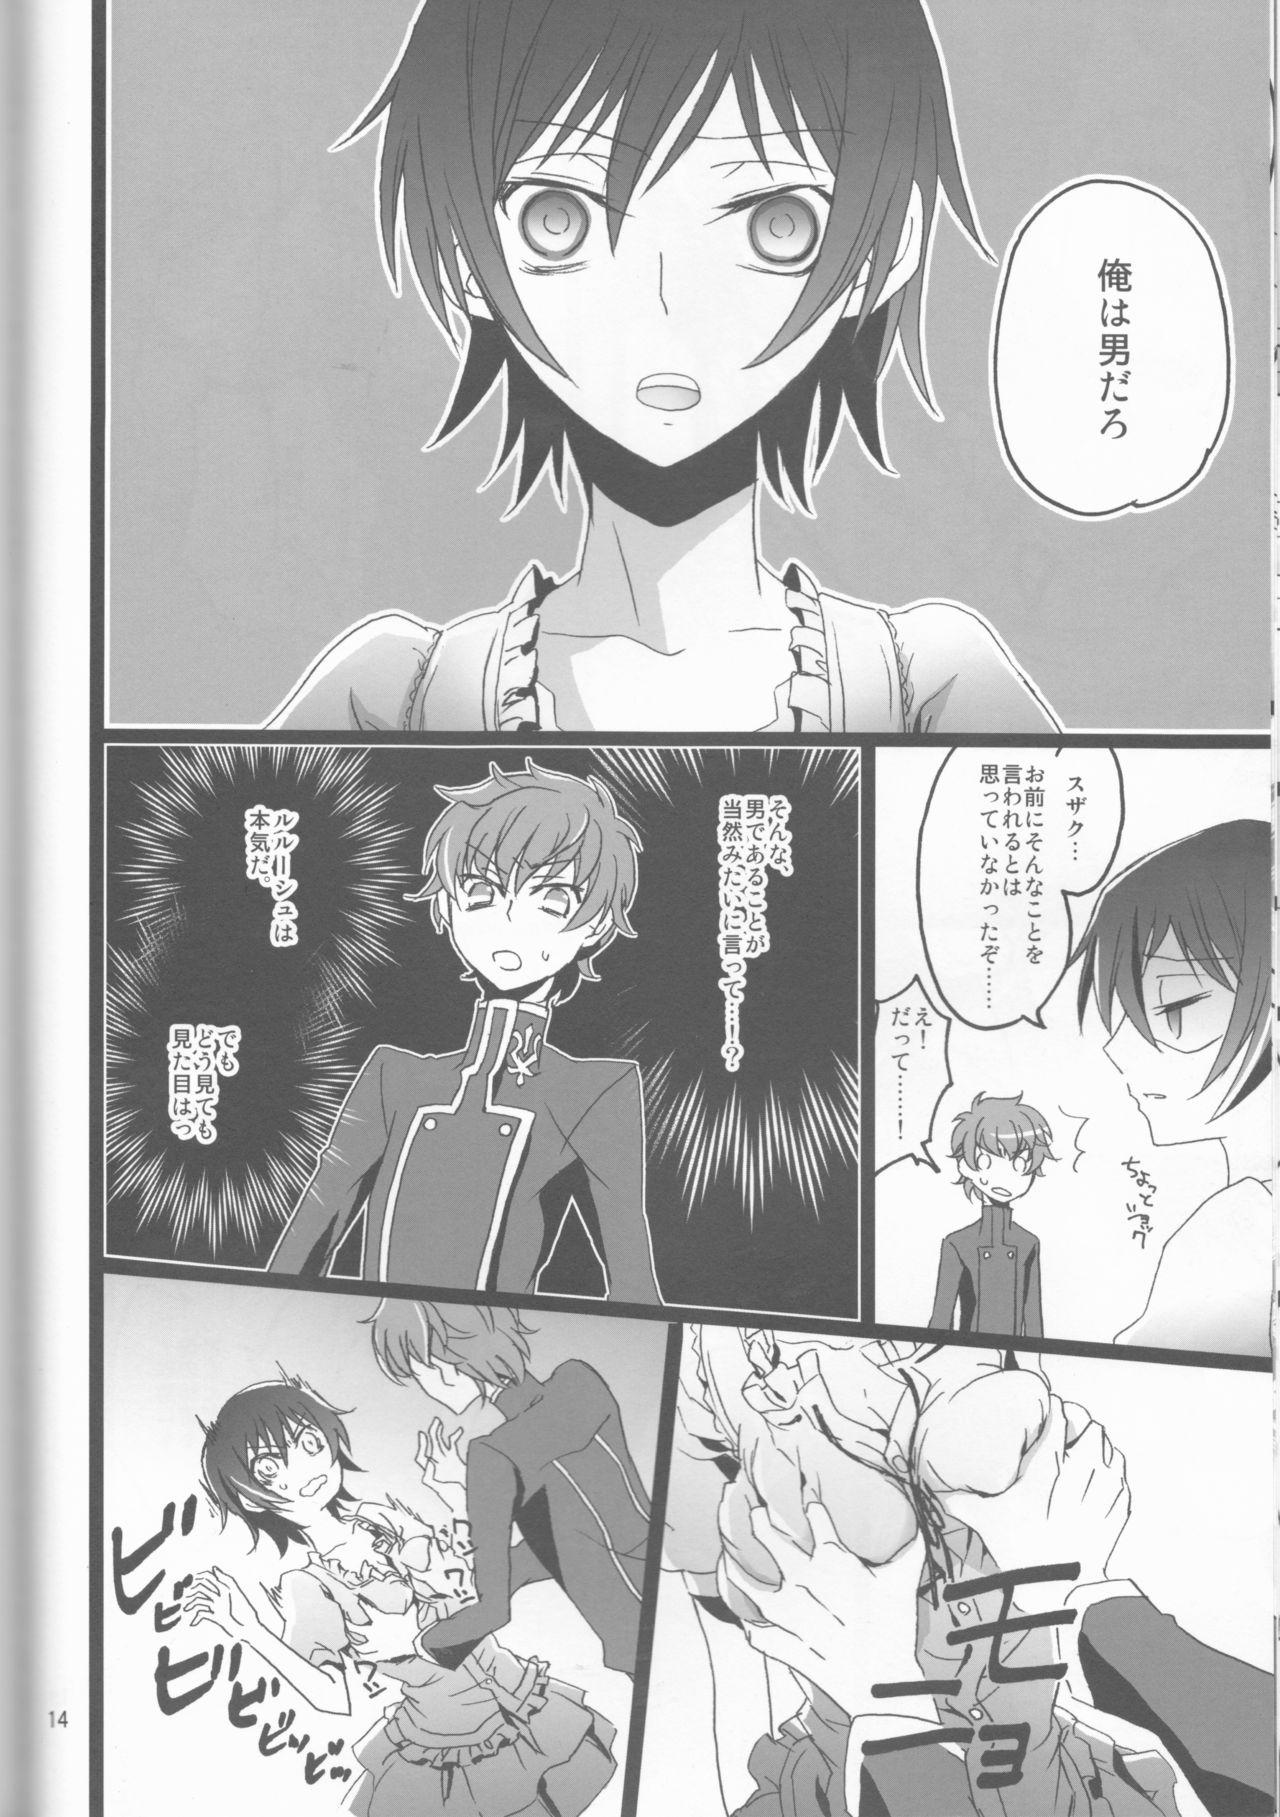 Pale Chameleon Girl - Code geass Gay Shorthair - Page 14